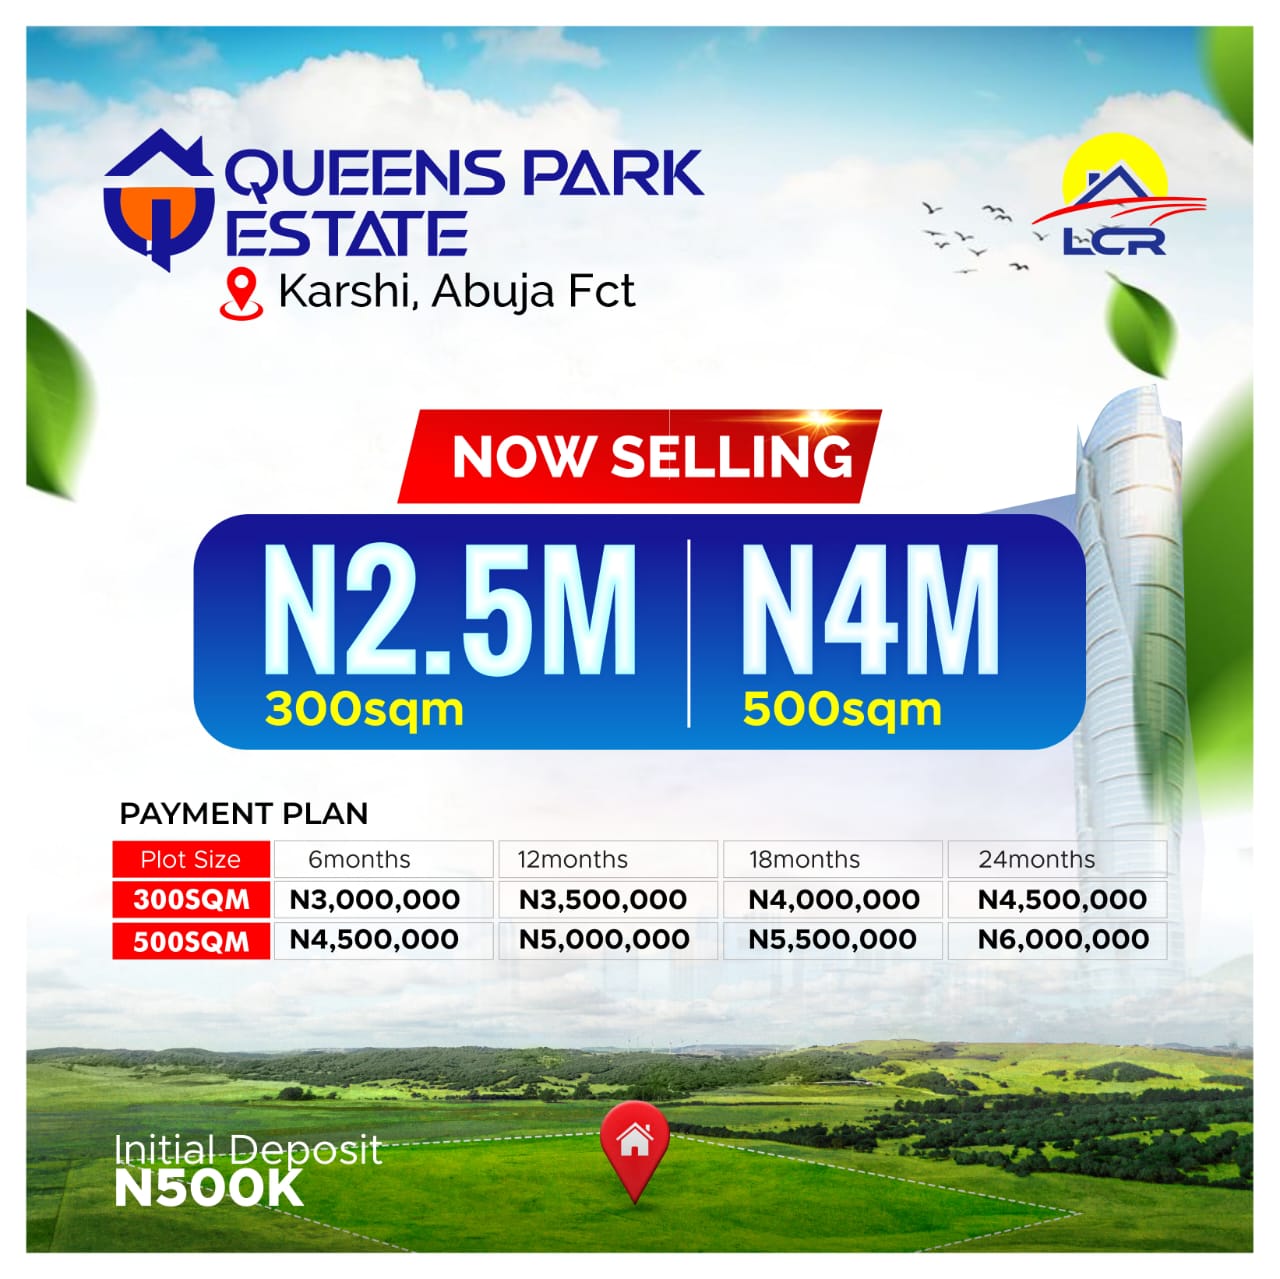 QUEENS PARK ESTATE, KARSHI, ABUJA. Karshi is located in the Federal Capital Territory of Nigeria and has emerged as a promising hotspot for real estate investment.